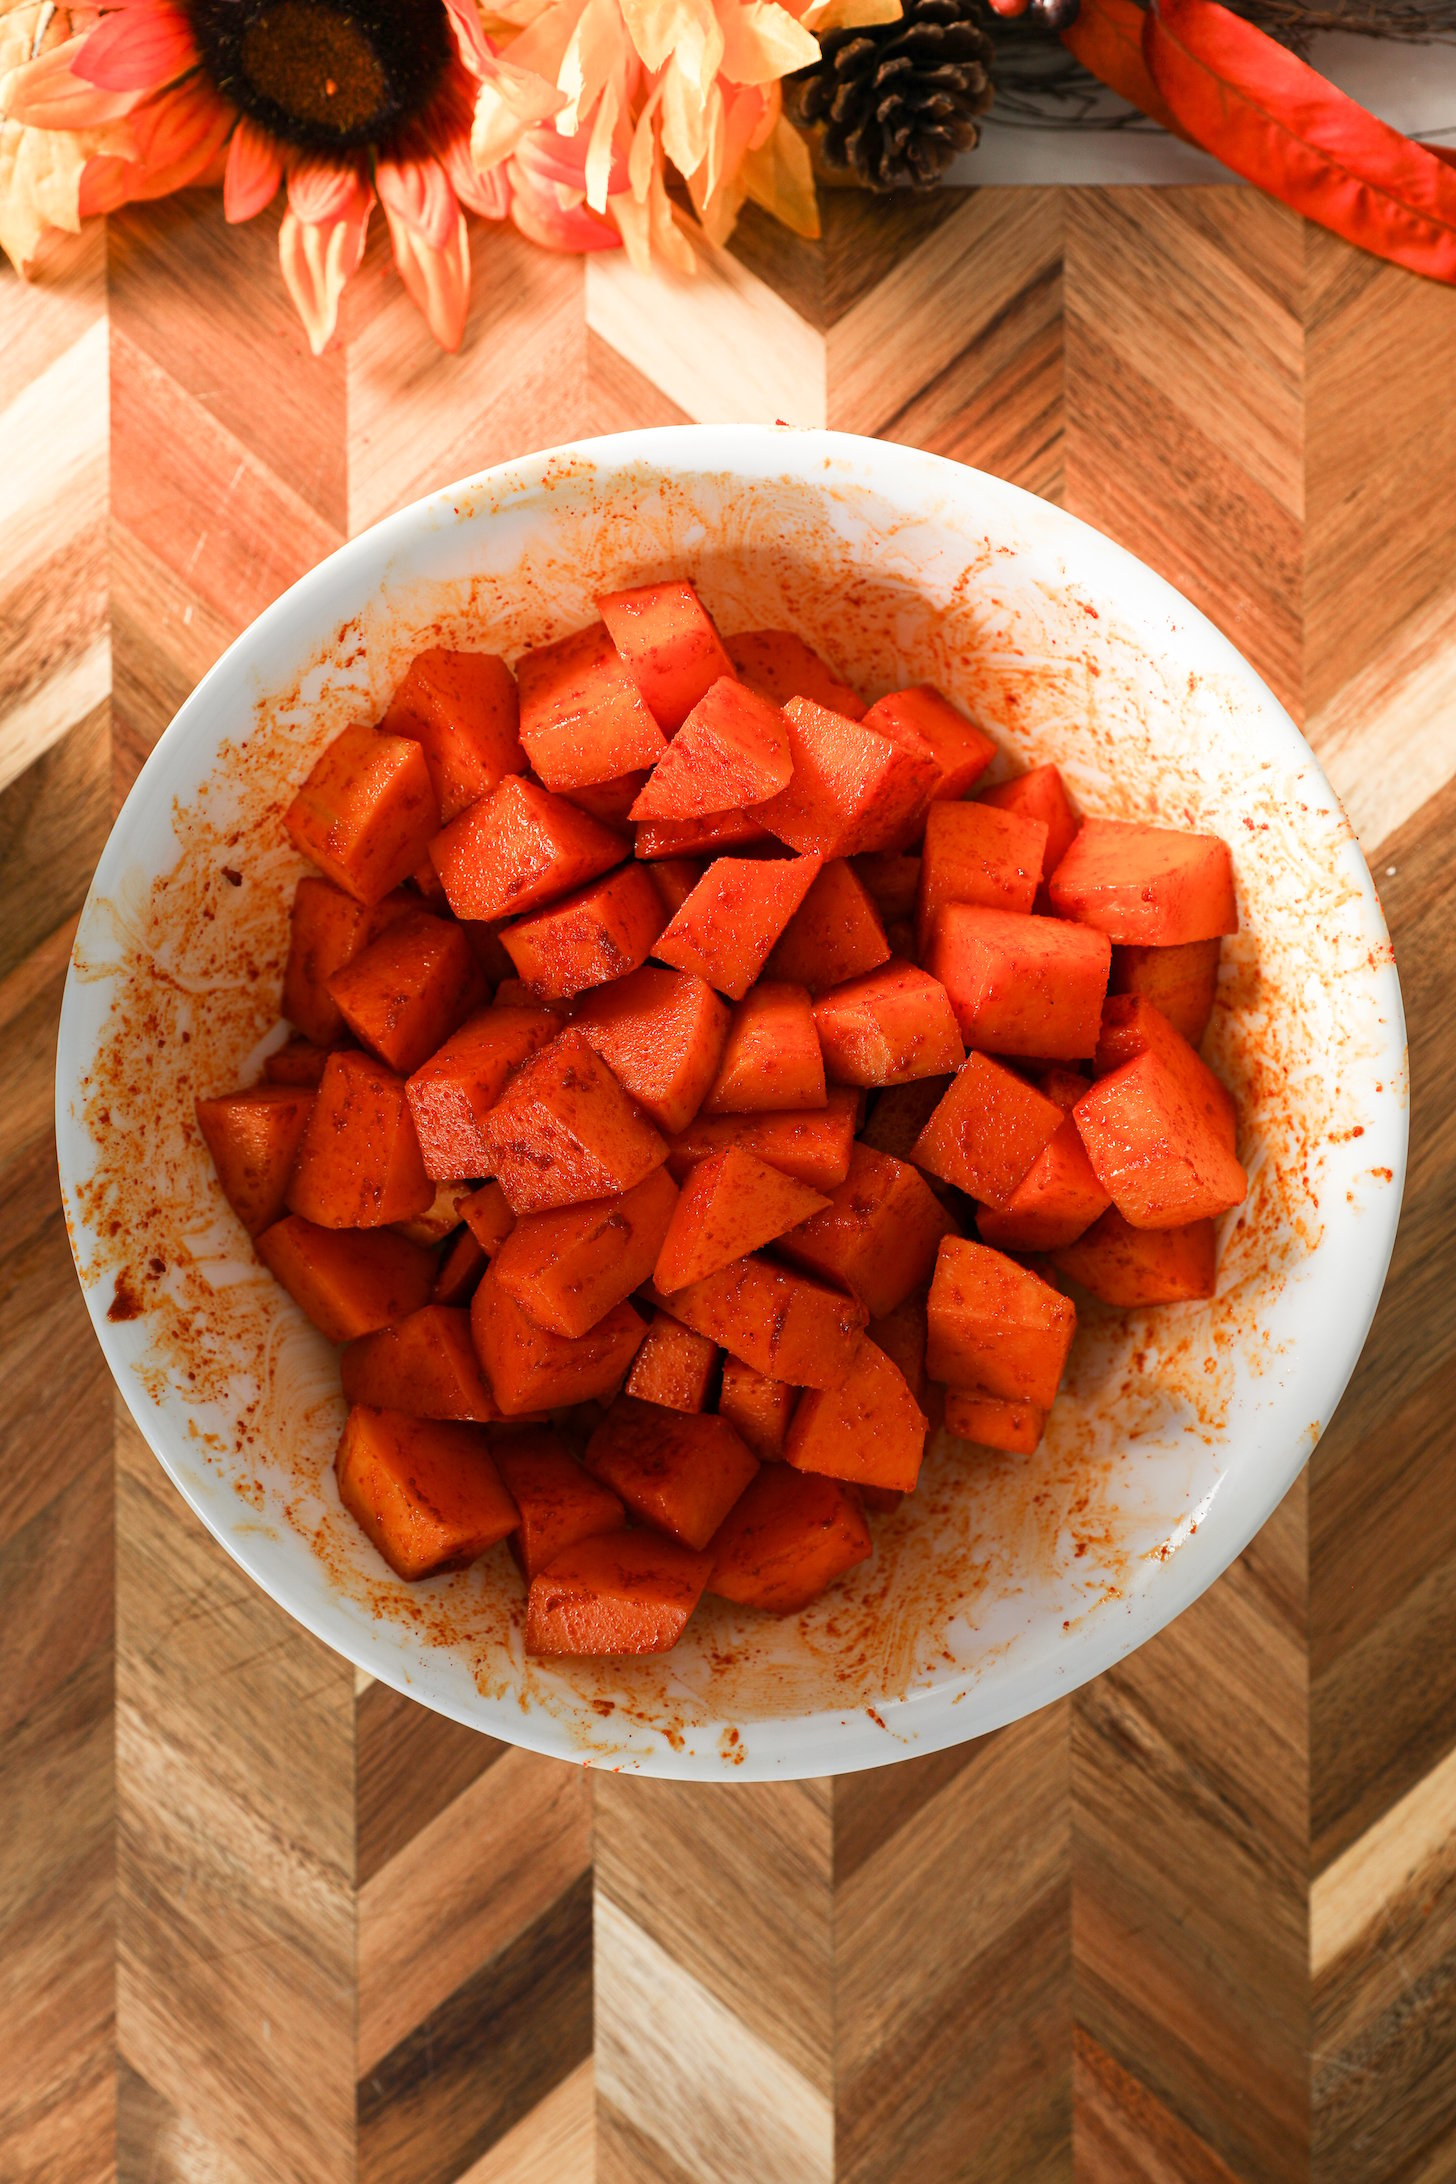 A large bowl of spice-coated pumpkin chunks, surrounded on a wooden board.